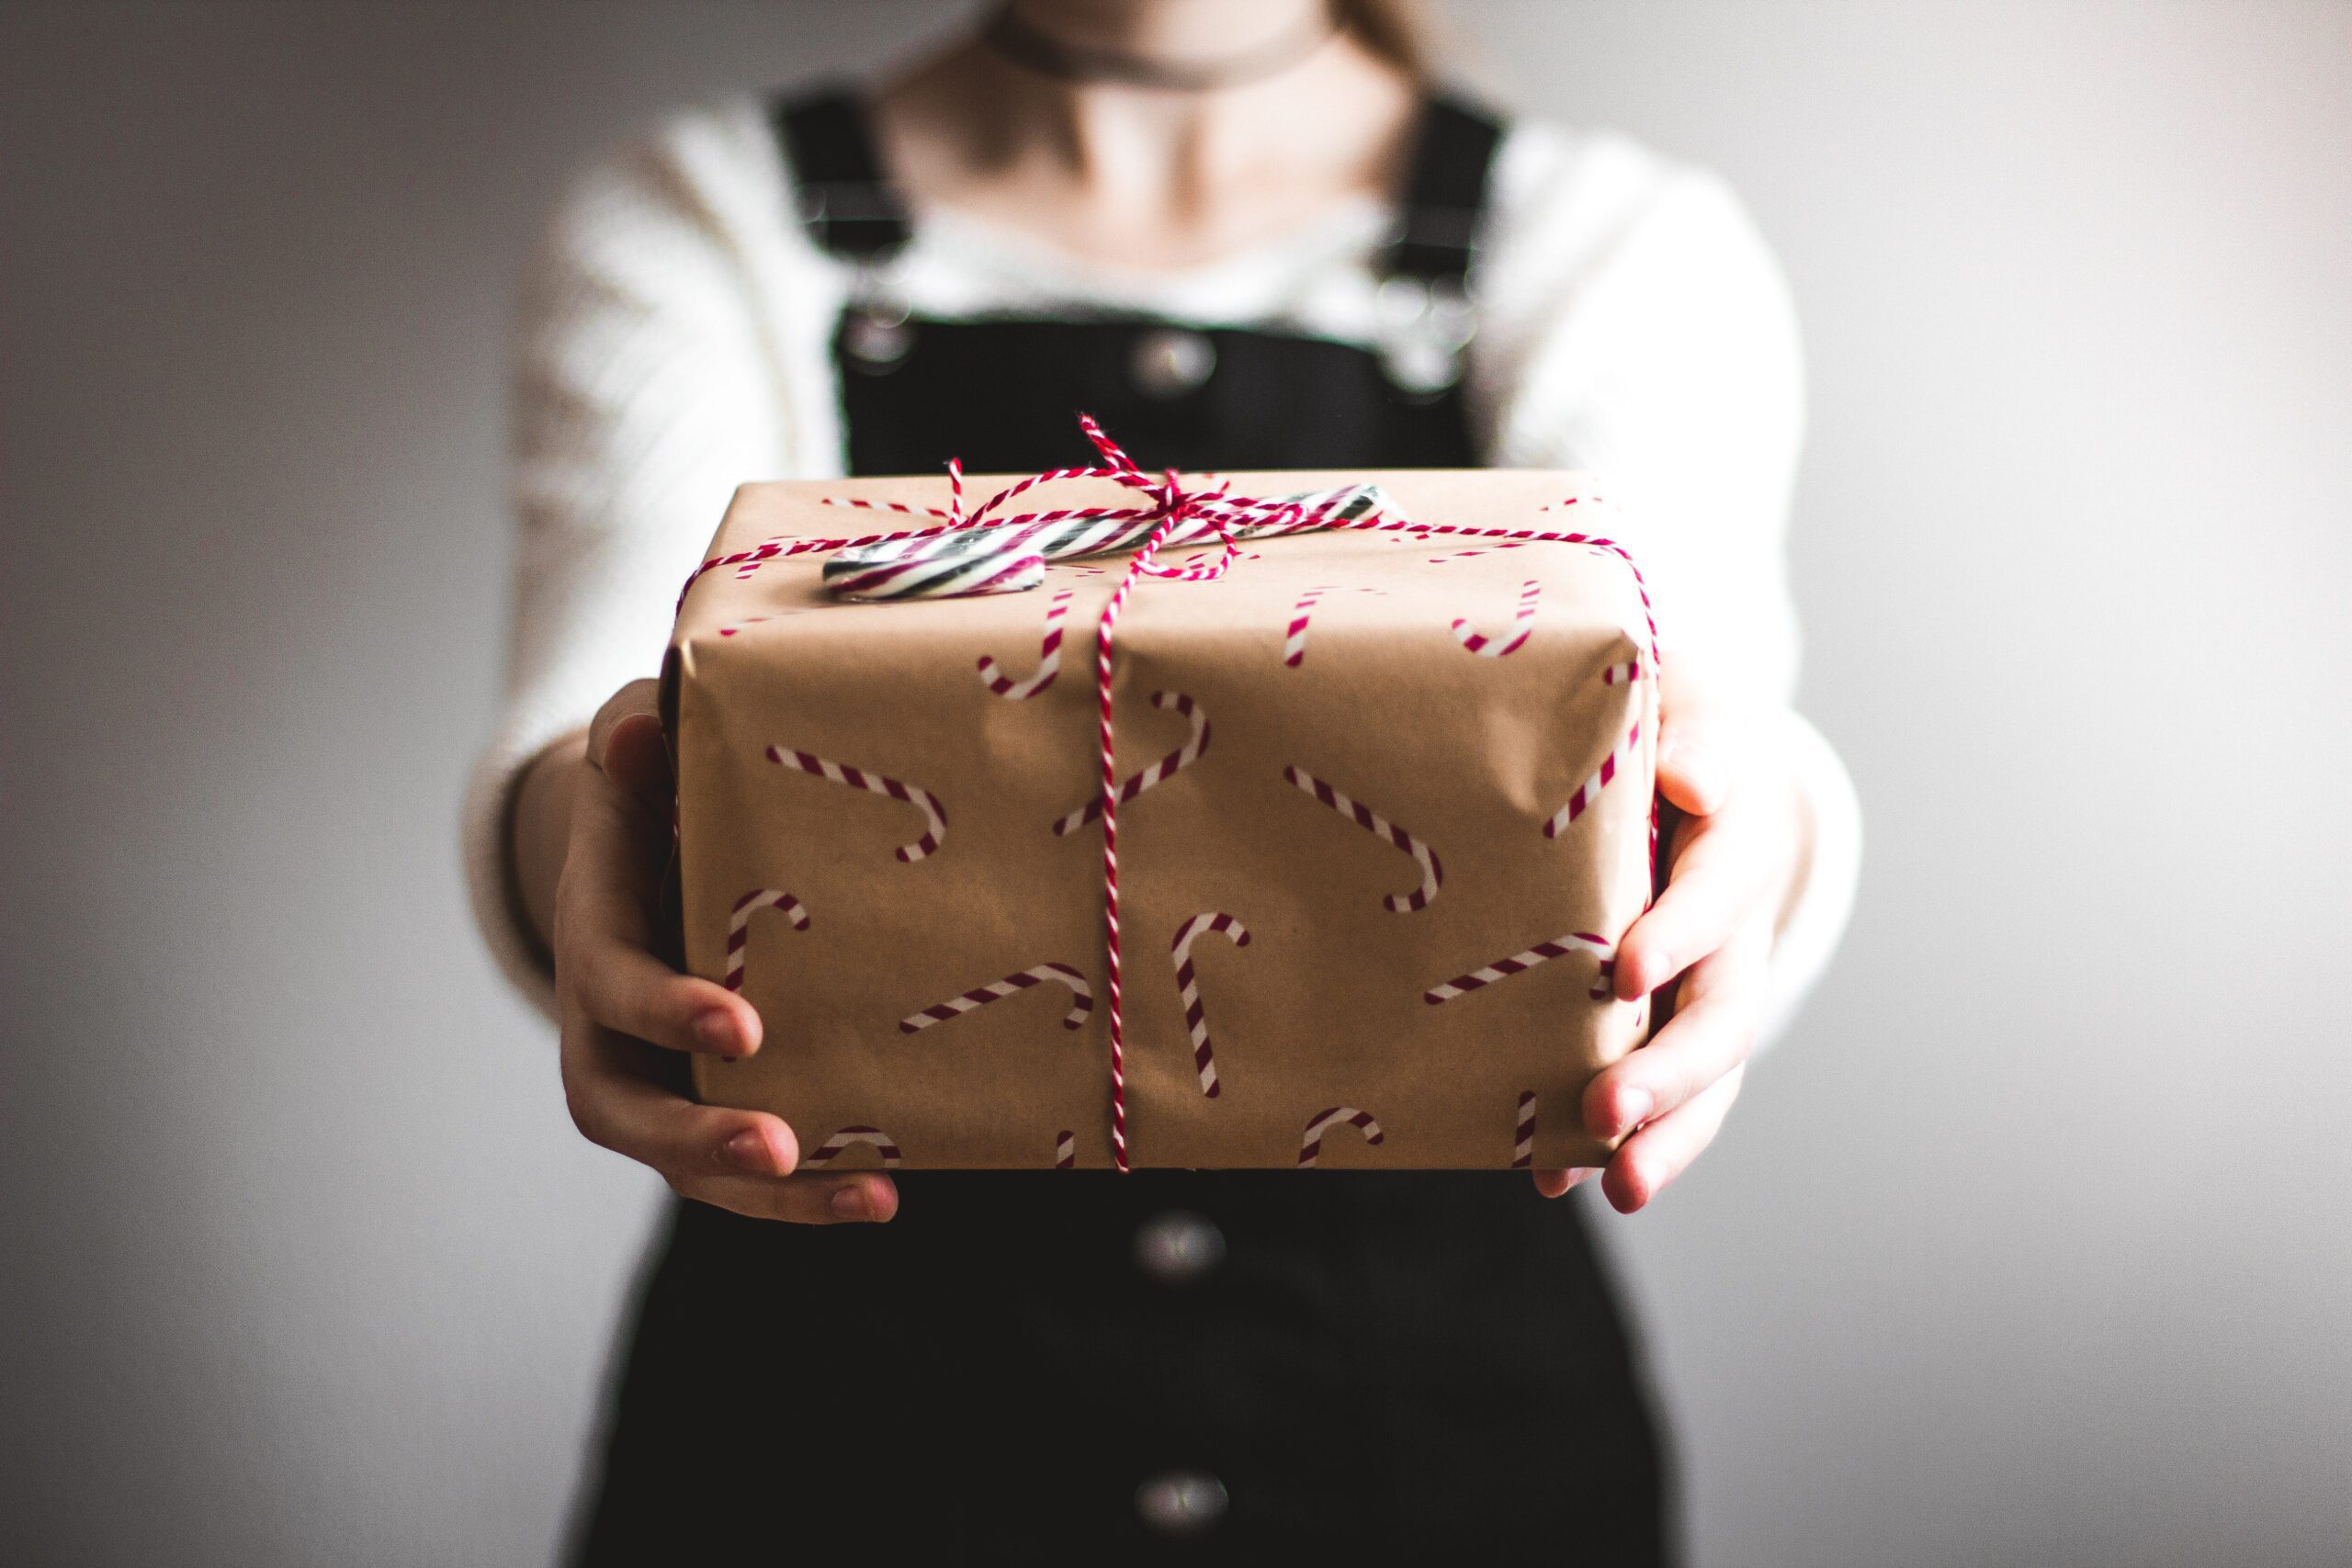 Person holding wrapped gift out in front of them. Brown paper wrapping paper with red and white candy canes